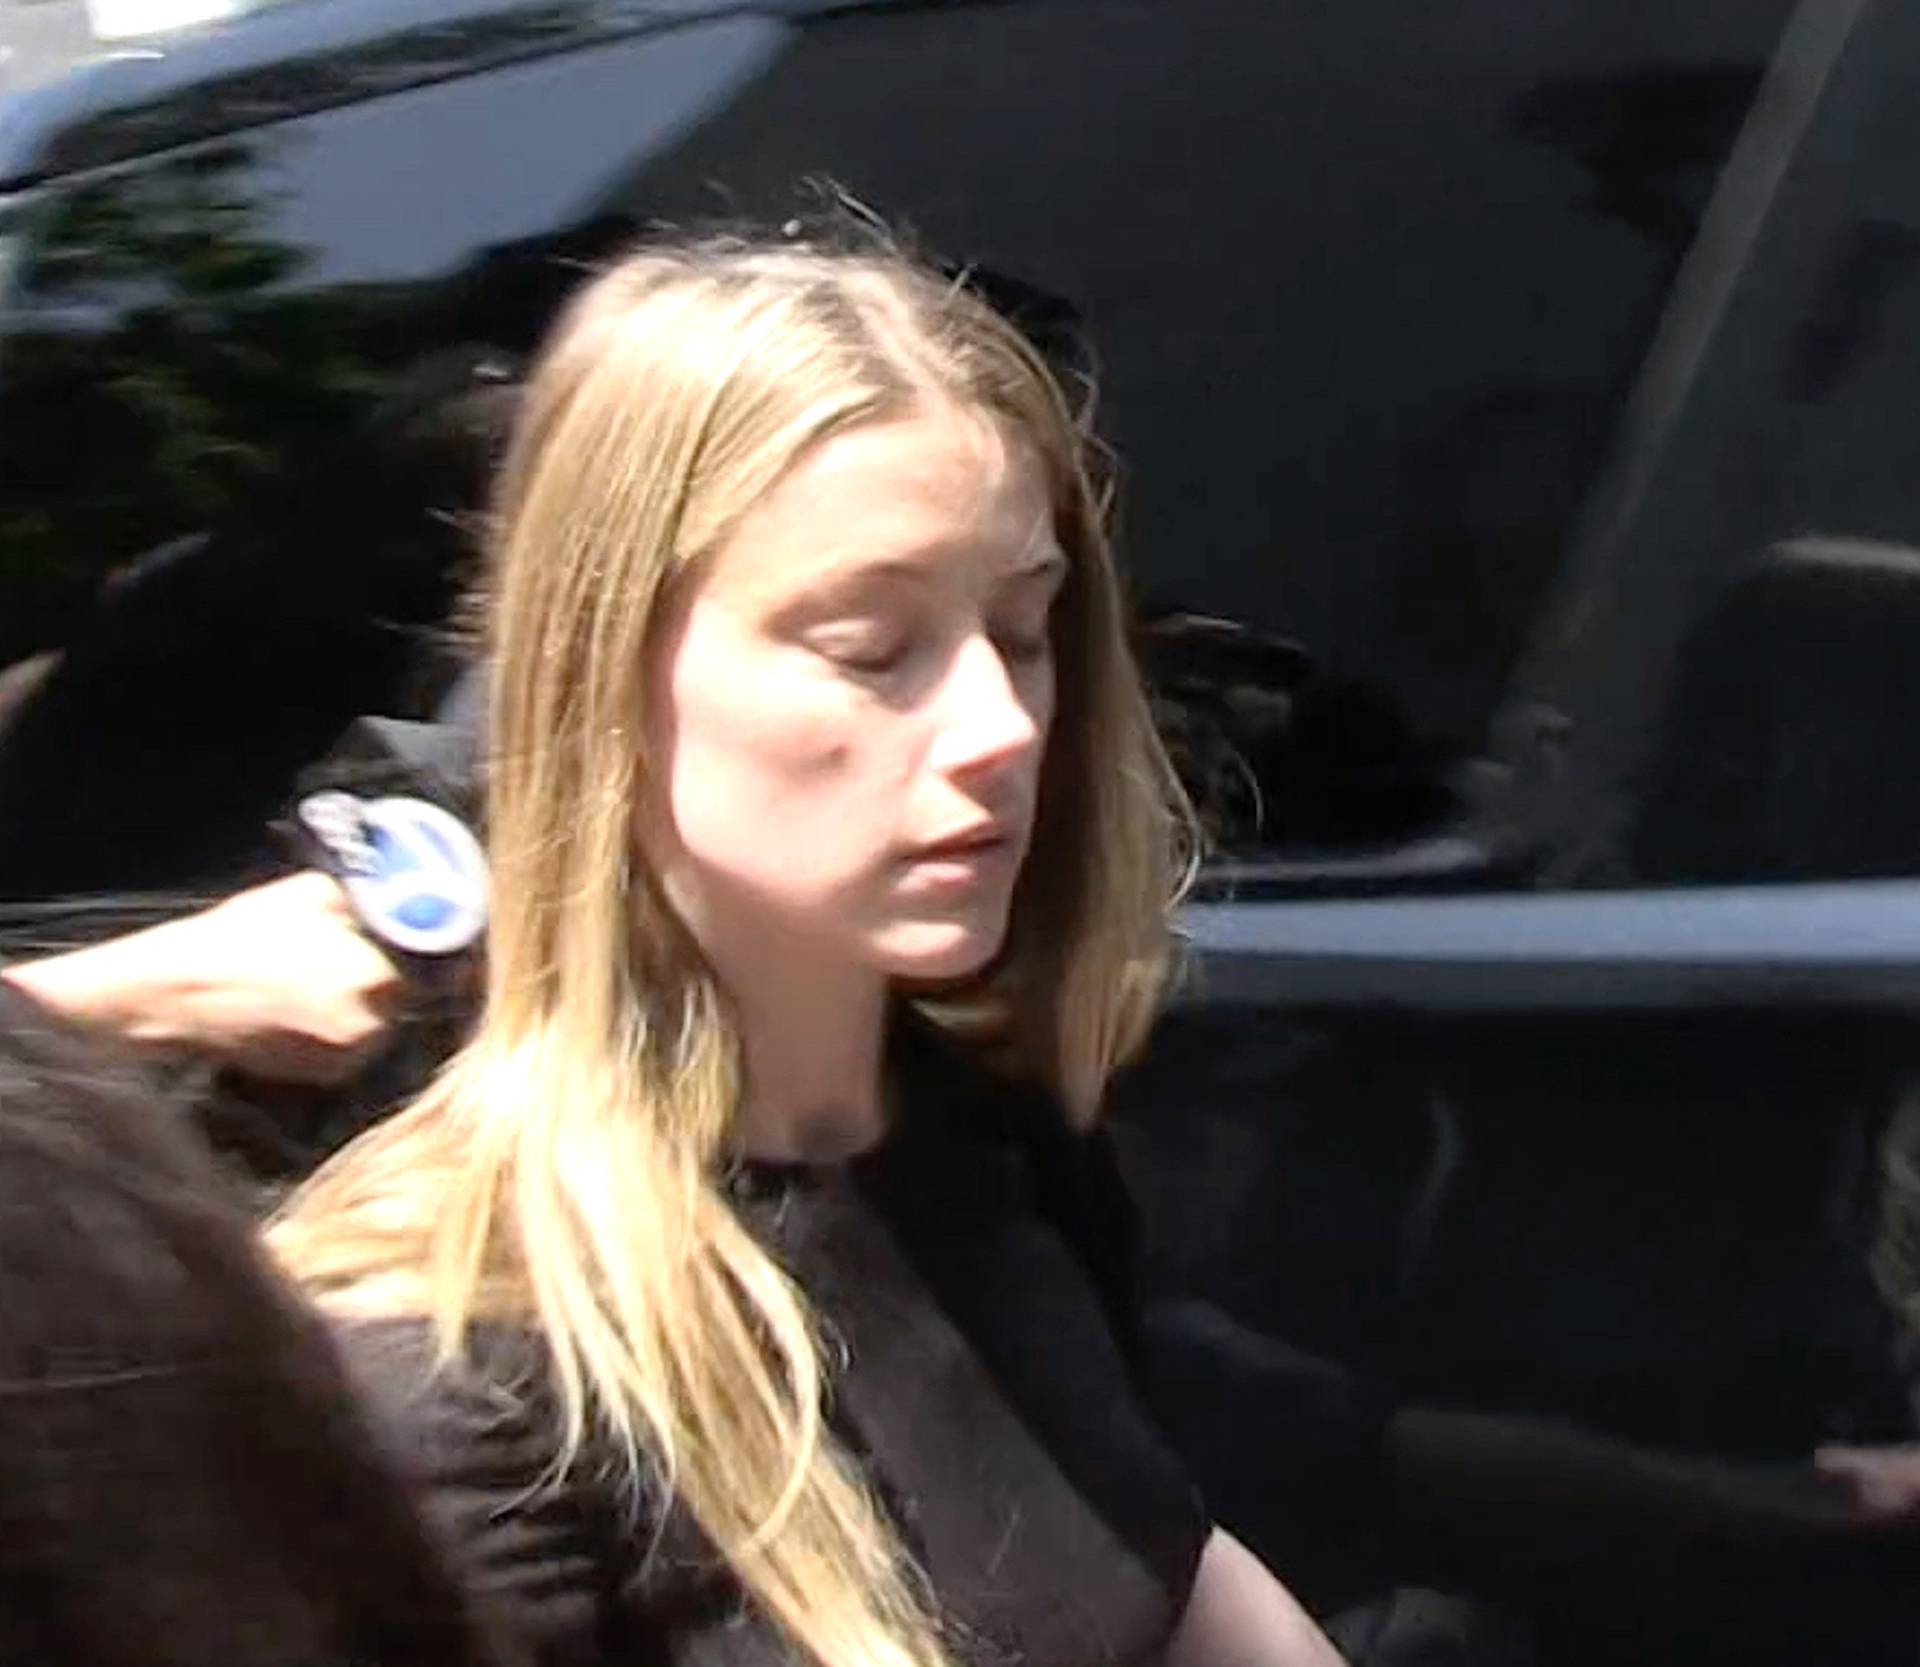 *PREMIUM EXCLUSIVE* Amber Heard Claims Domestic Violence, Gets Restraining Order Against Johnny Depp **MUST CALL FOR PRICING**